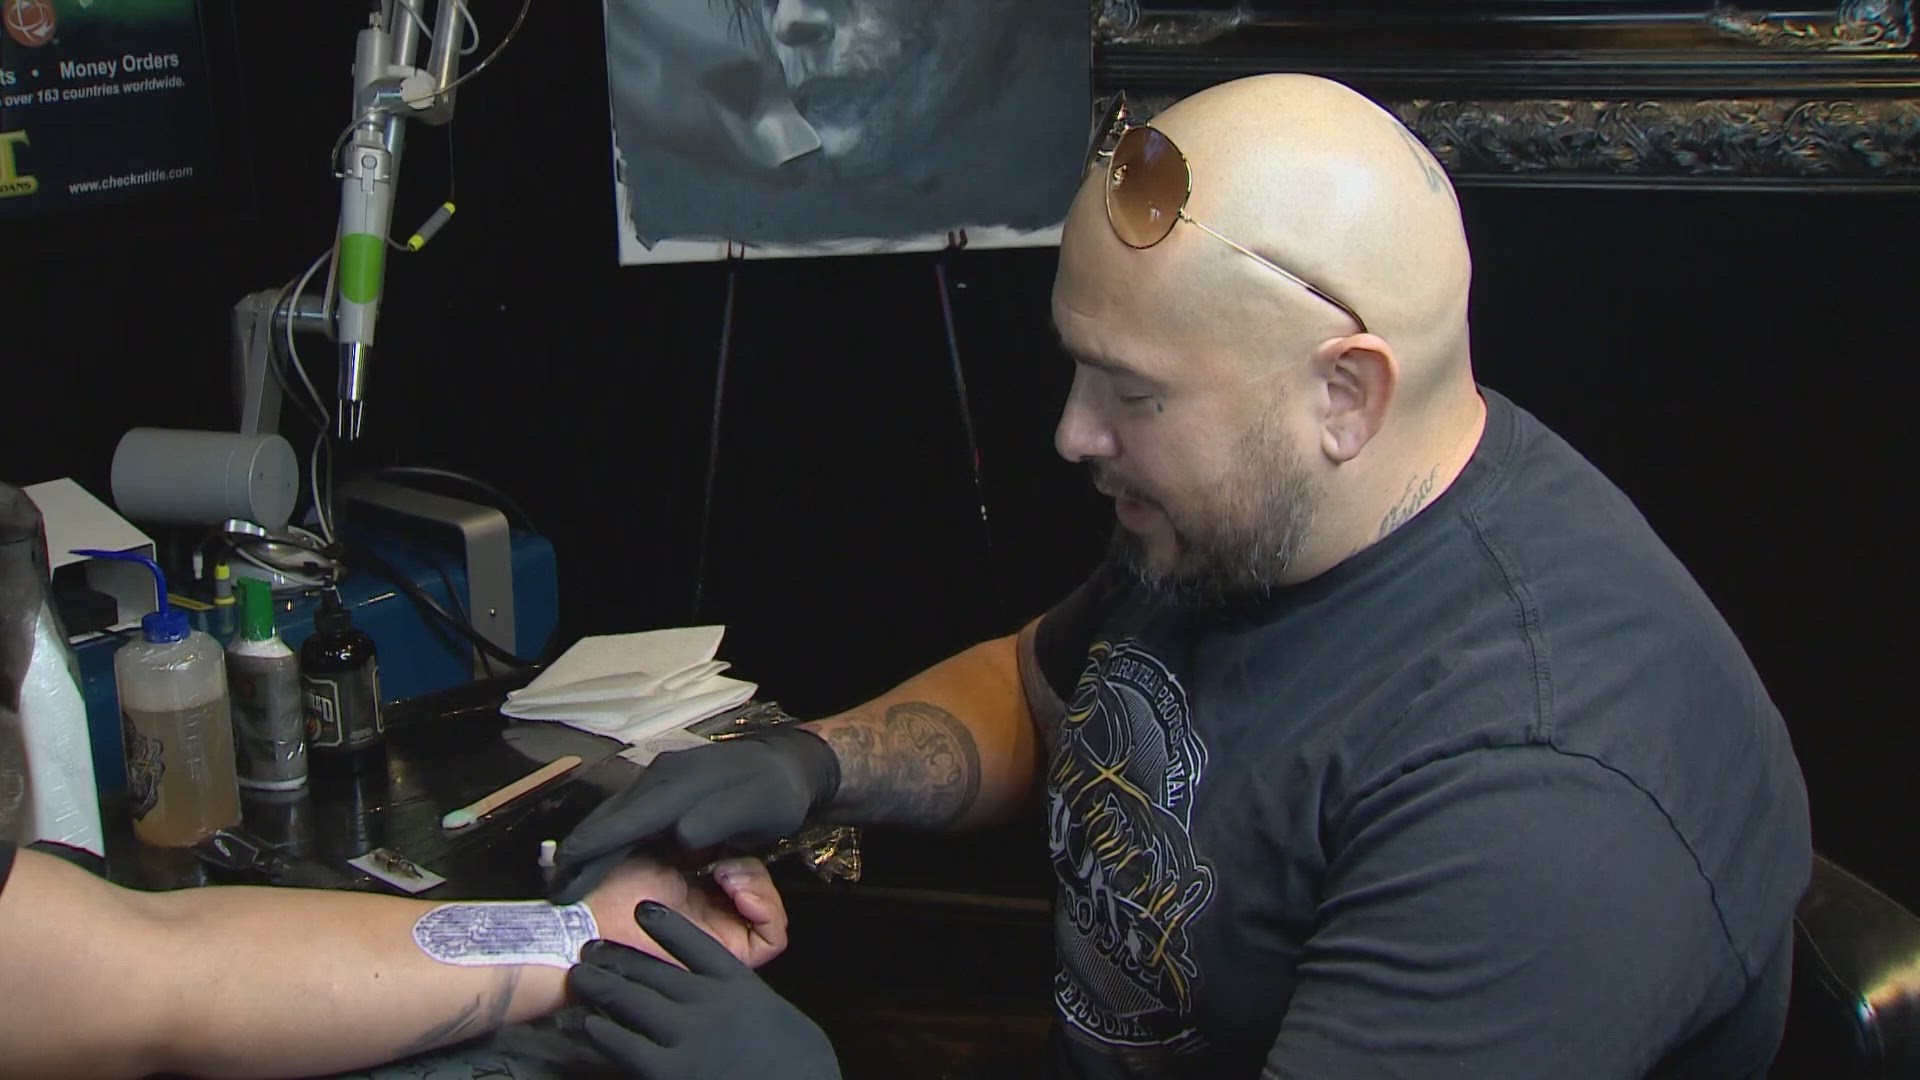 Fans commemorated the World Series champions, the Texas Rangers, by getting tattoos. "When they win, we’re winning with them," said Ramiro Guerrero.